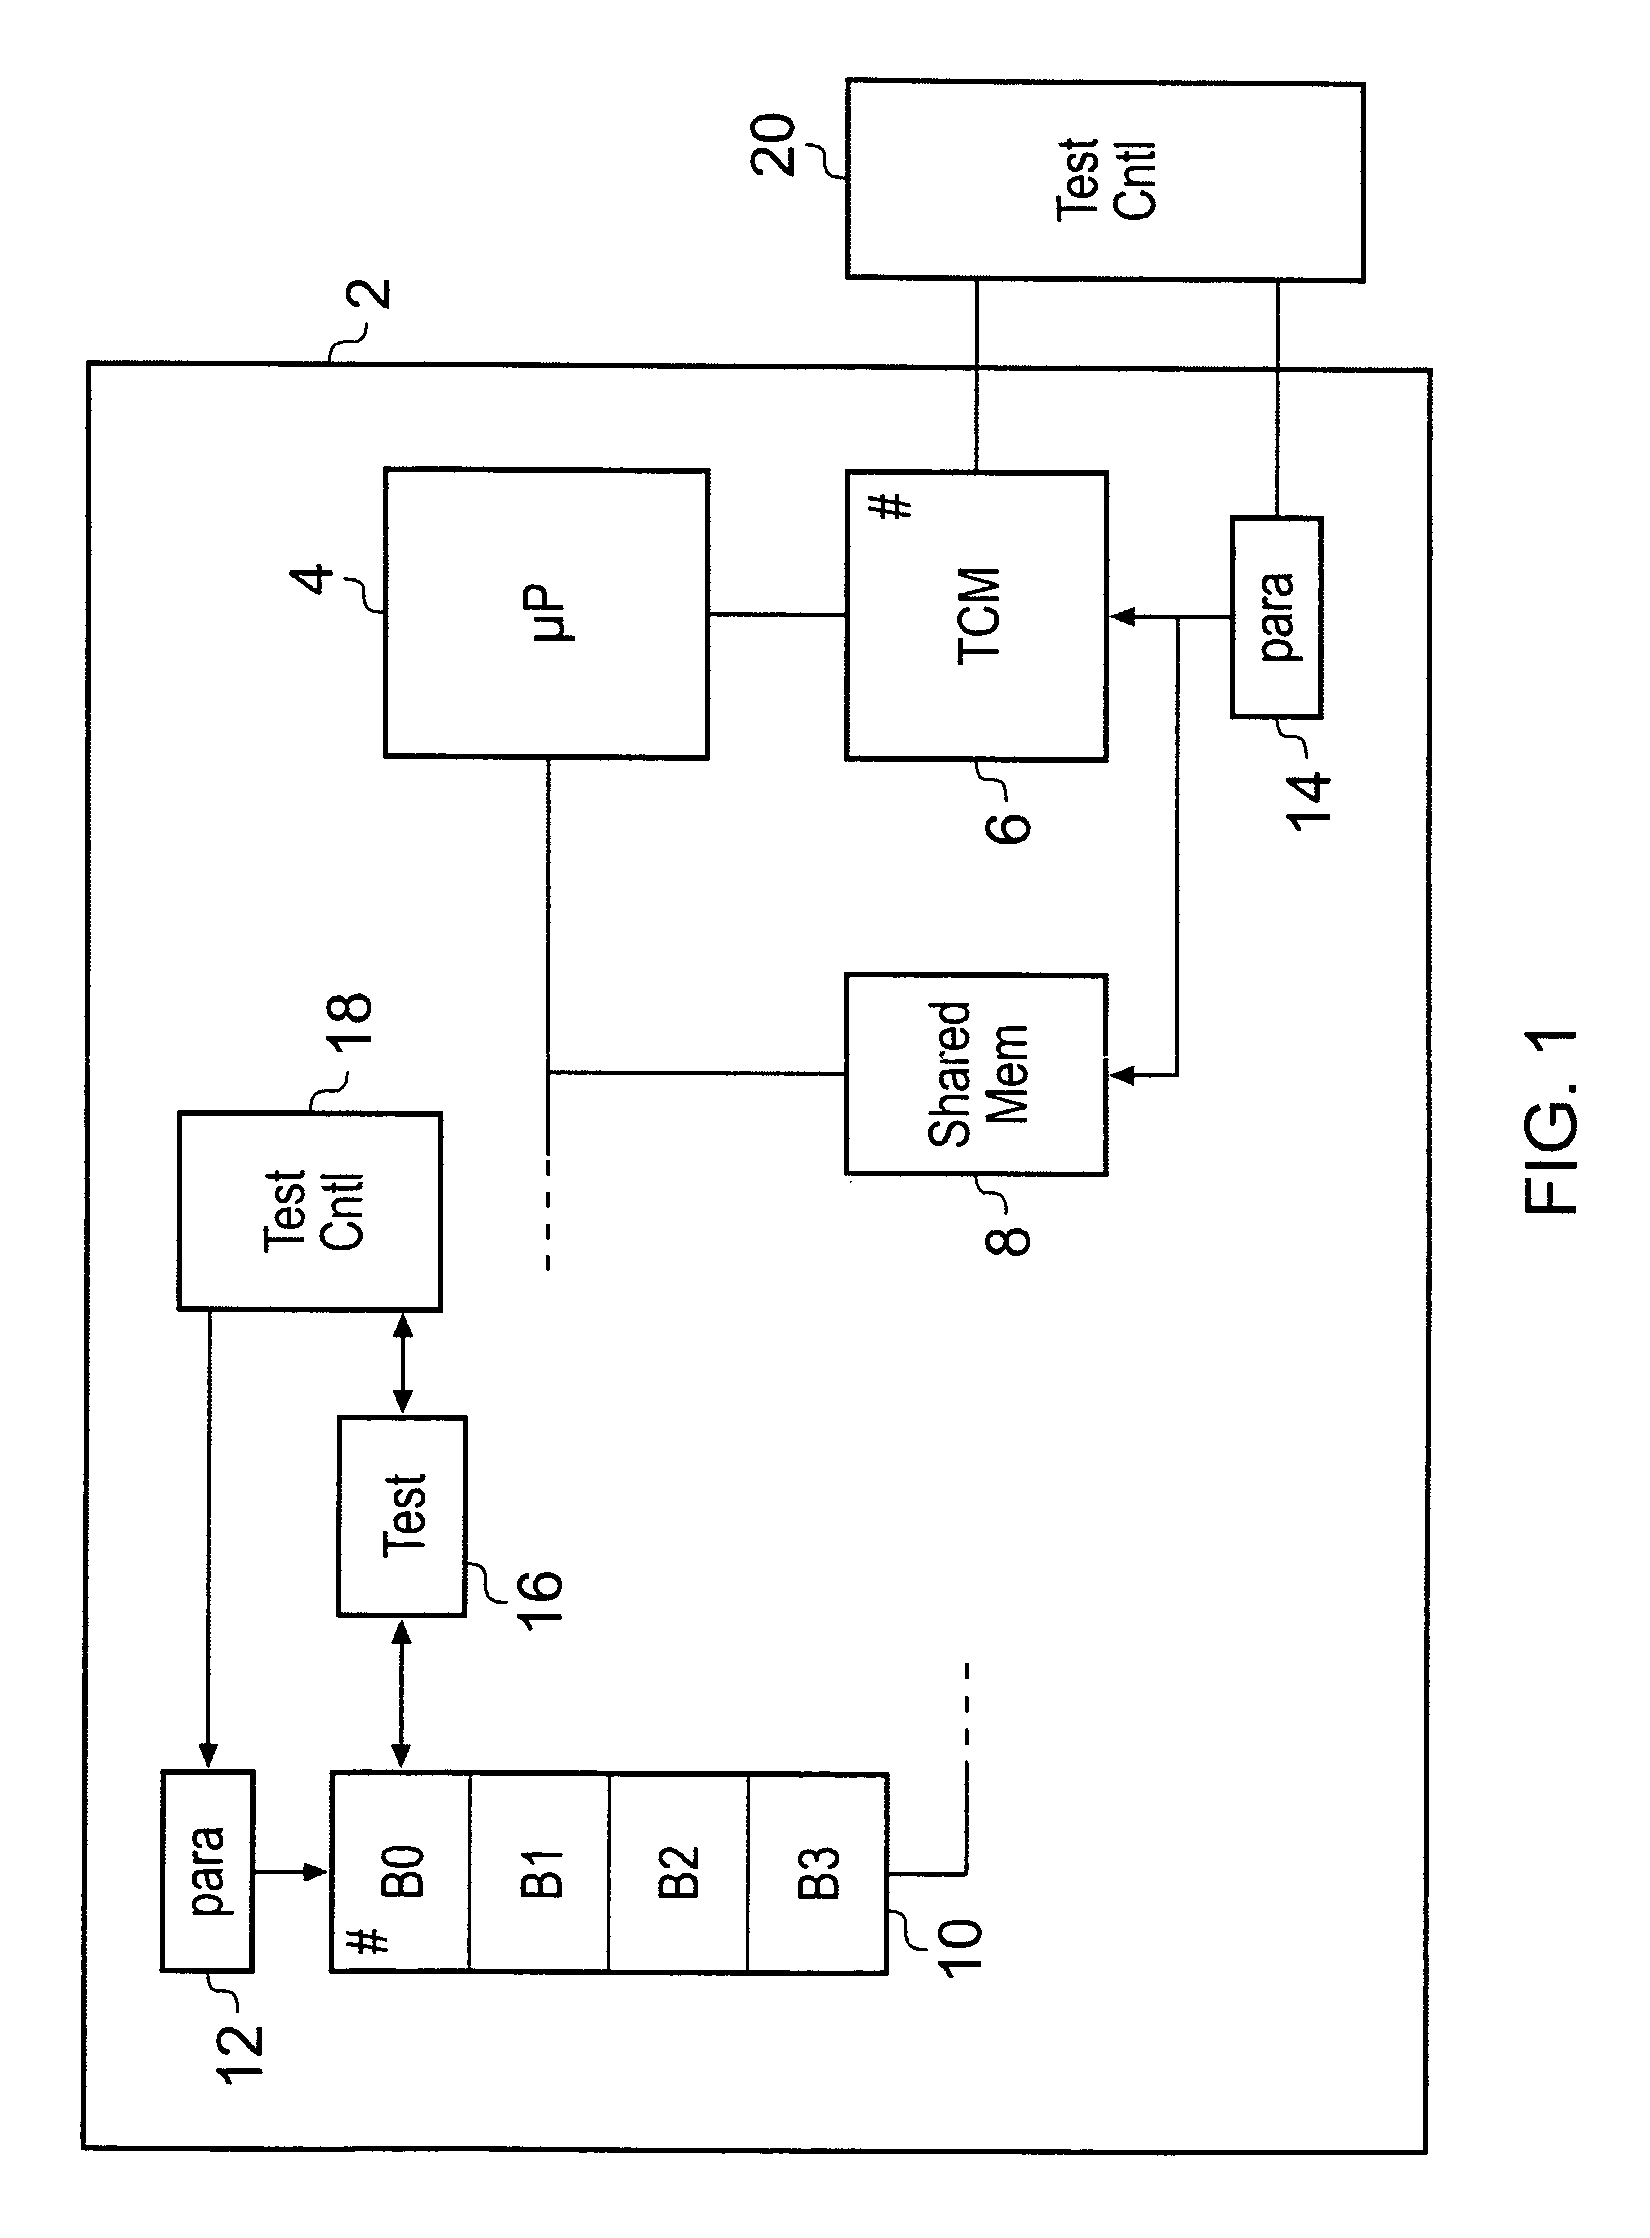 Performance control of an integrated circuit